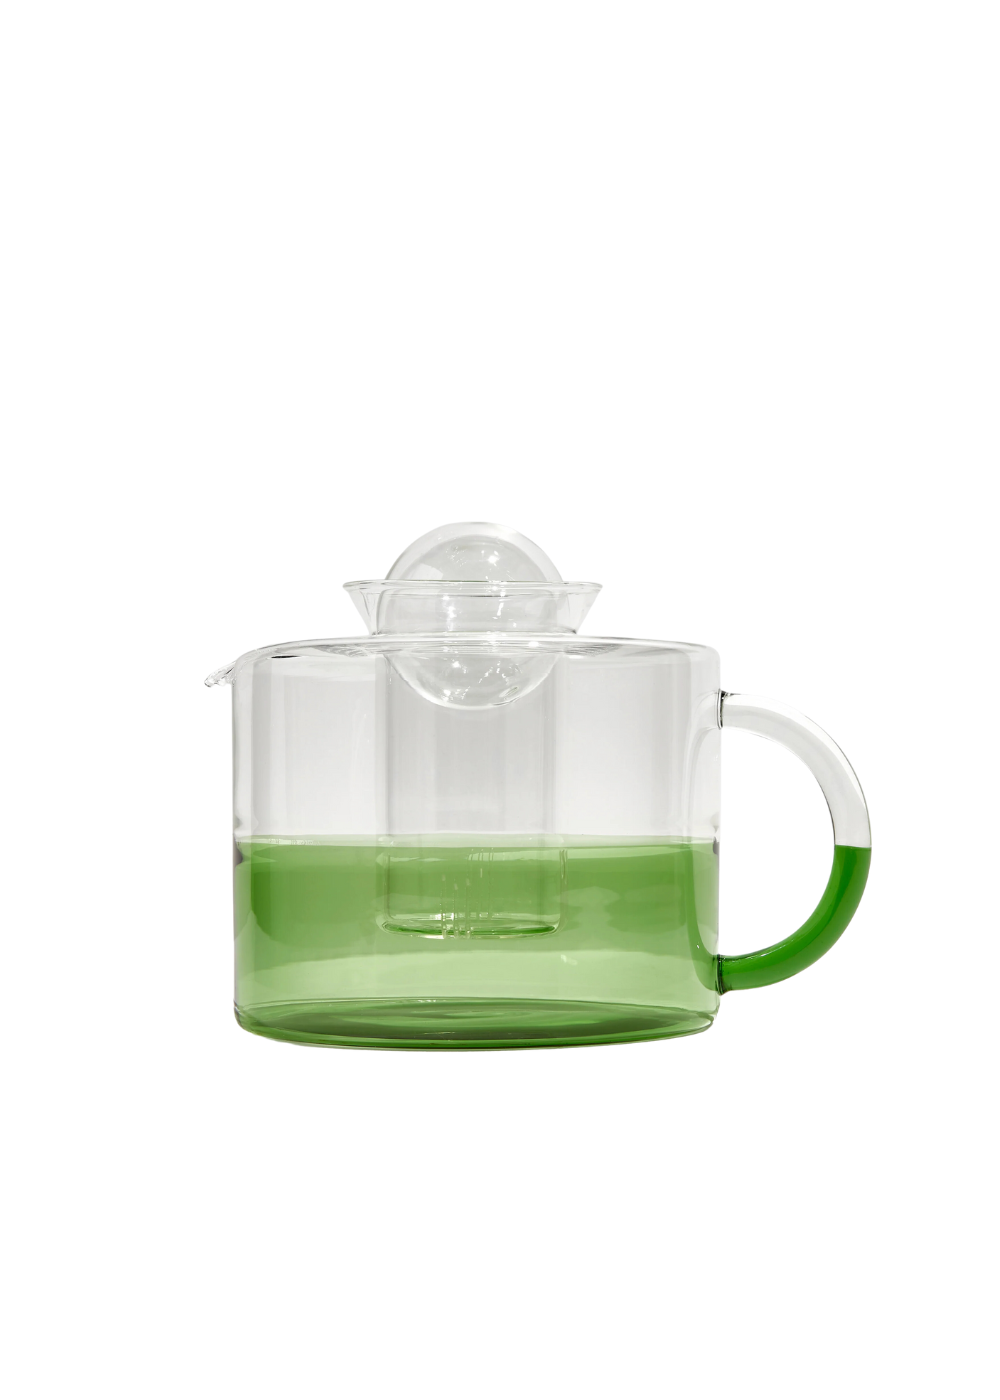 two tone teapot - clear + green